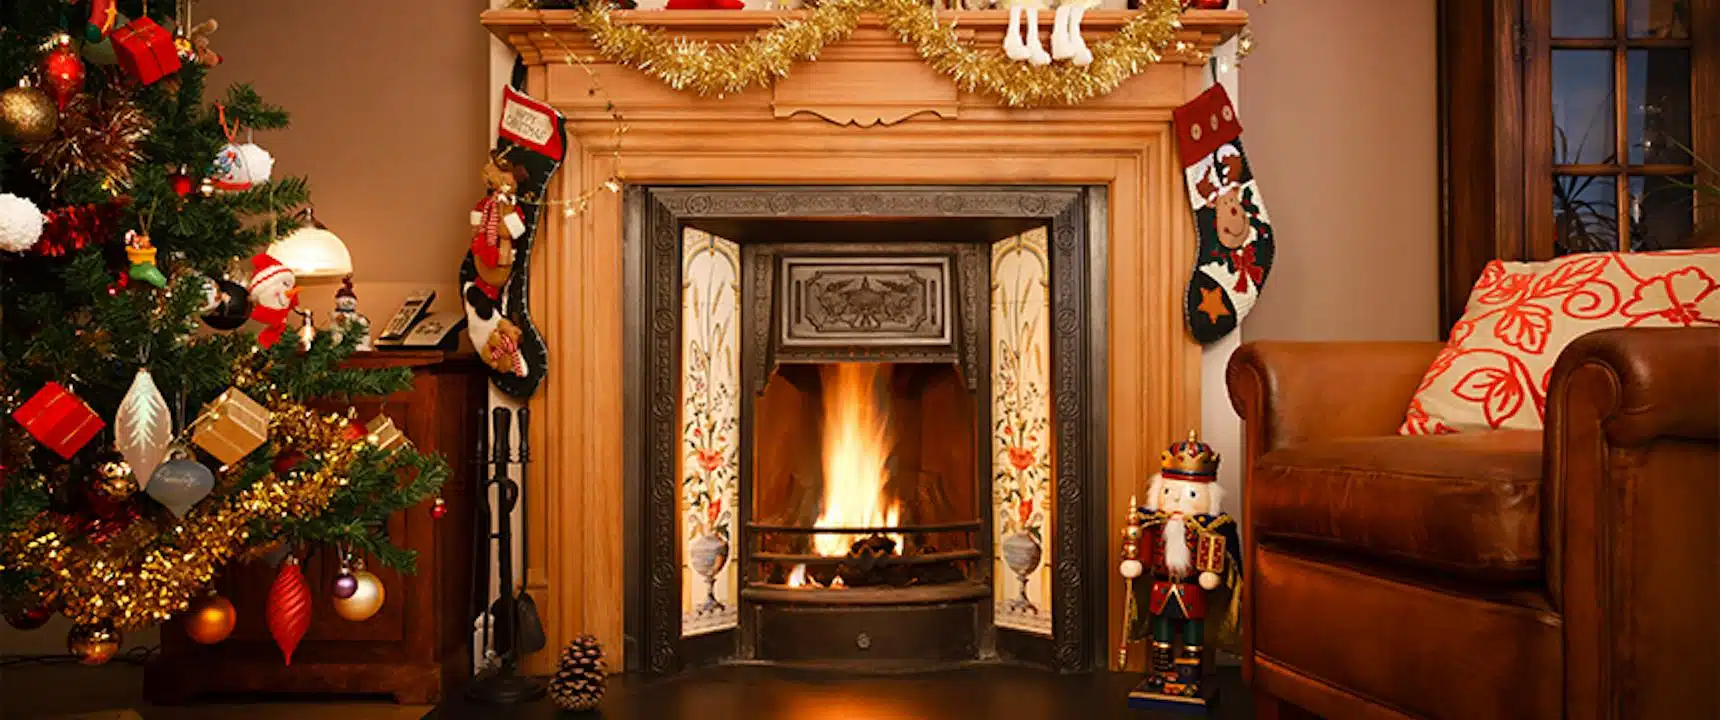 decorated fireplace for christmas. Cleaning dirty chimney